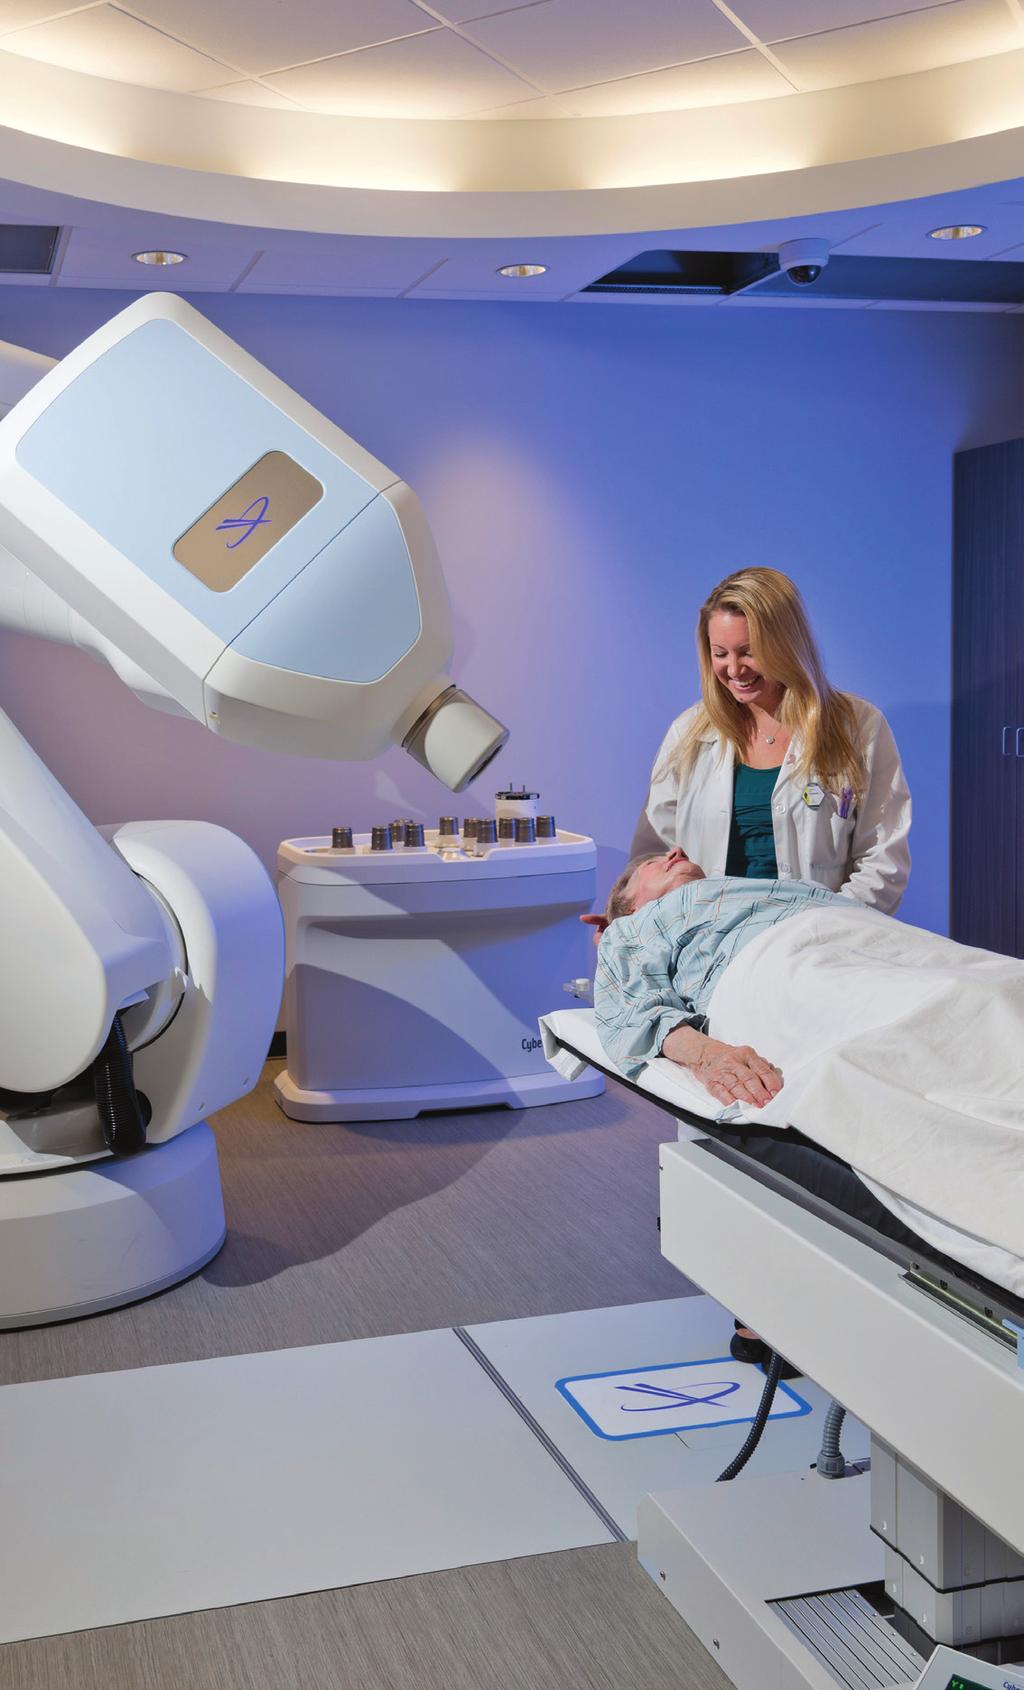 Every care plan is personalized for you. And we make sure you and your referring doctors stay informed every step of the way. How Precision CyberKnife Works.